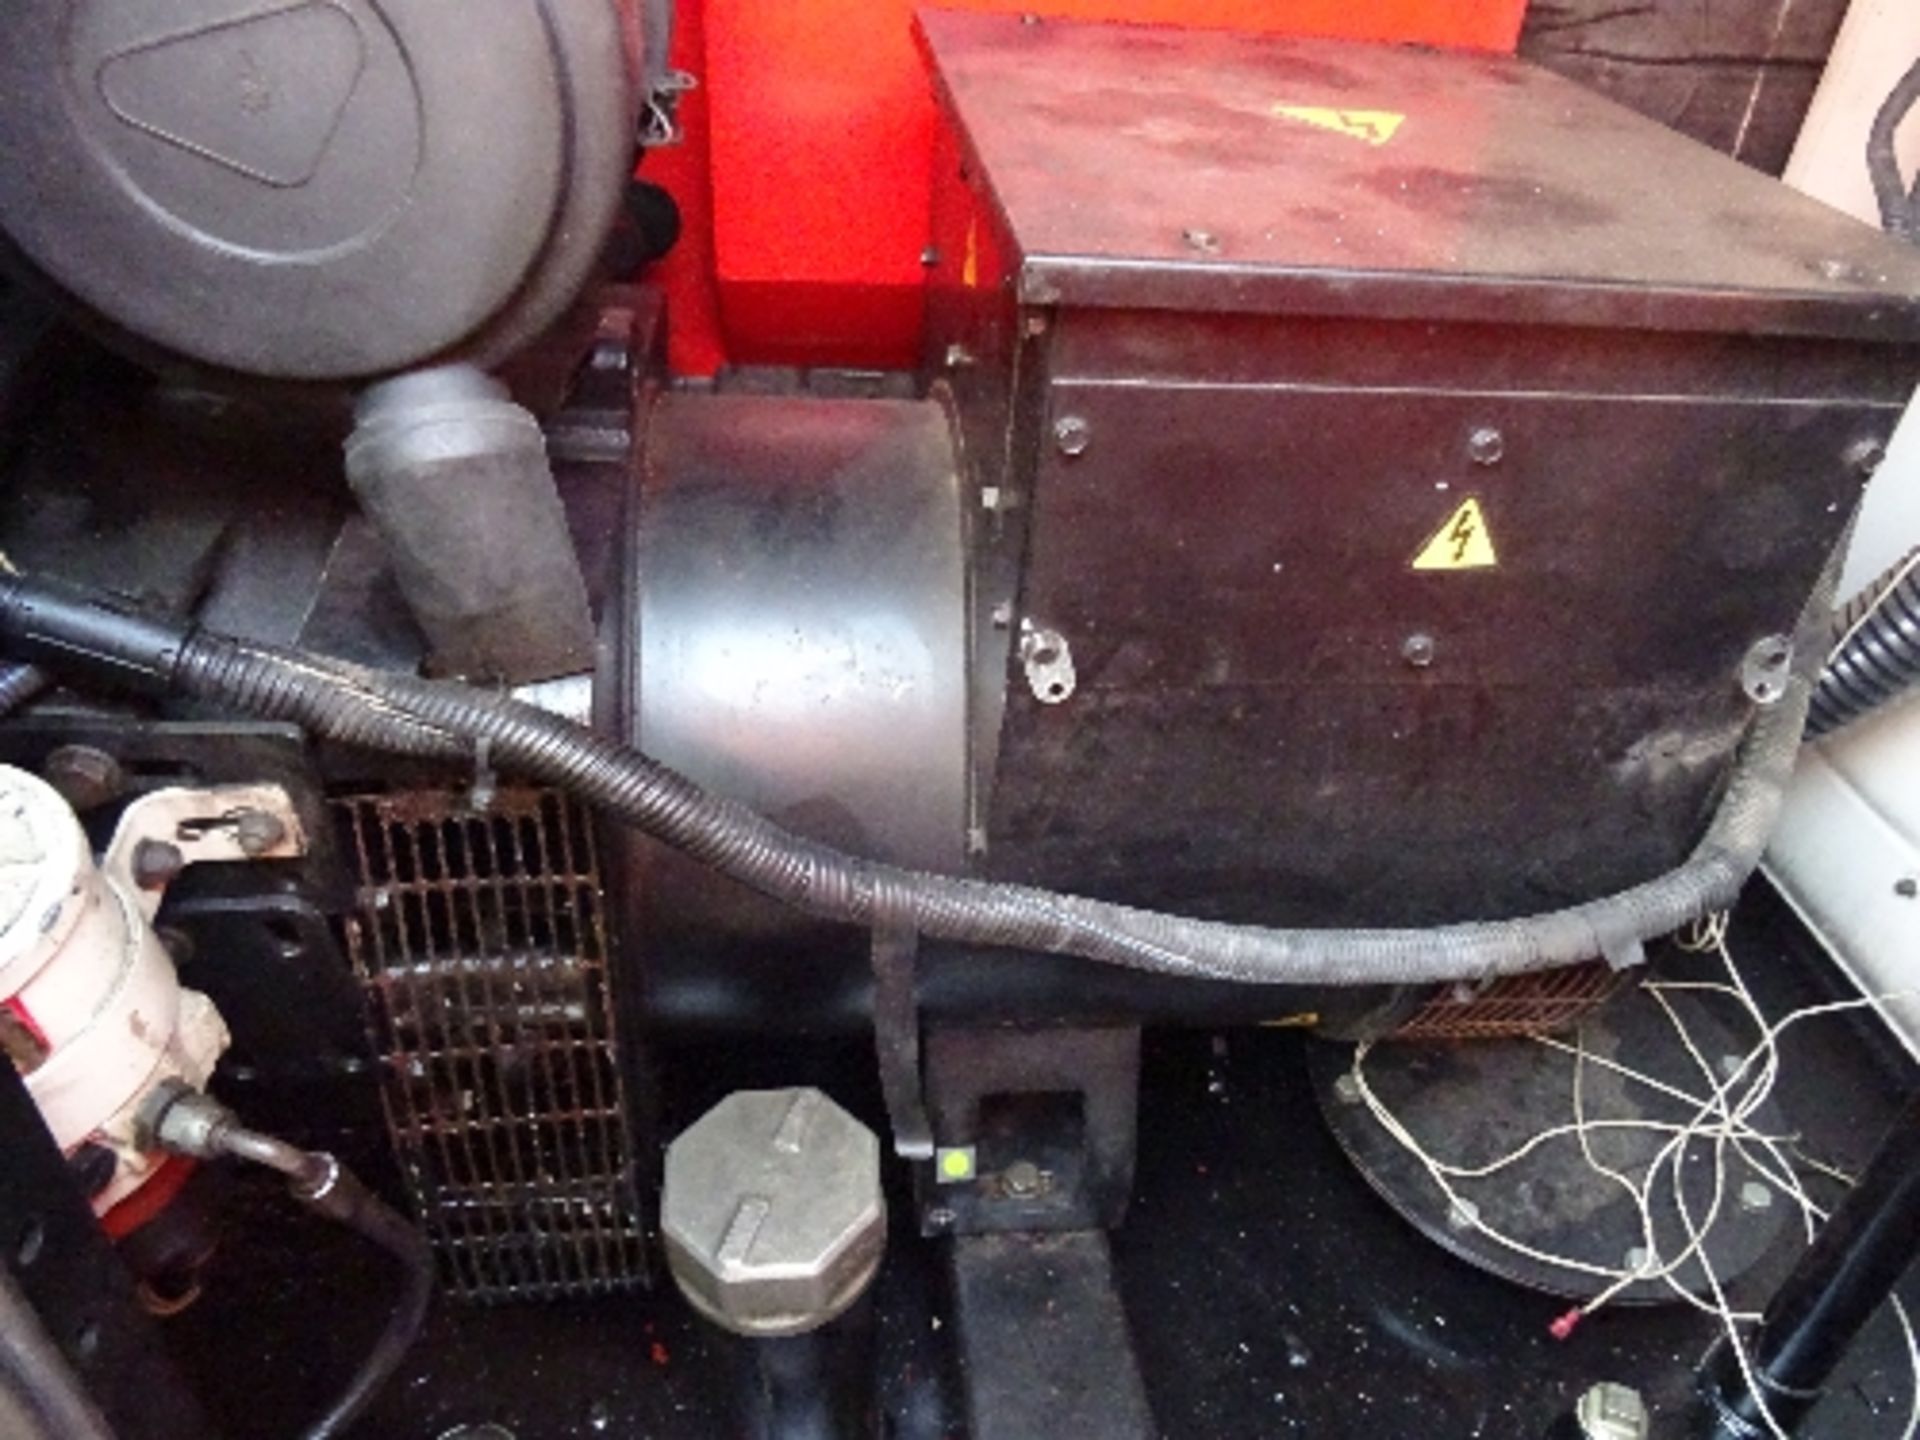 FG Wilson 60kva generator 31038 hrs - starts and runs - drive to alternator disconnected This lot is - Image 6 of 6